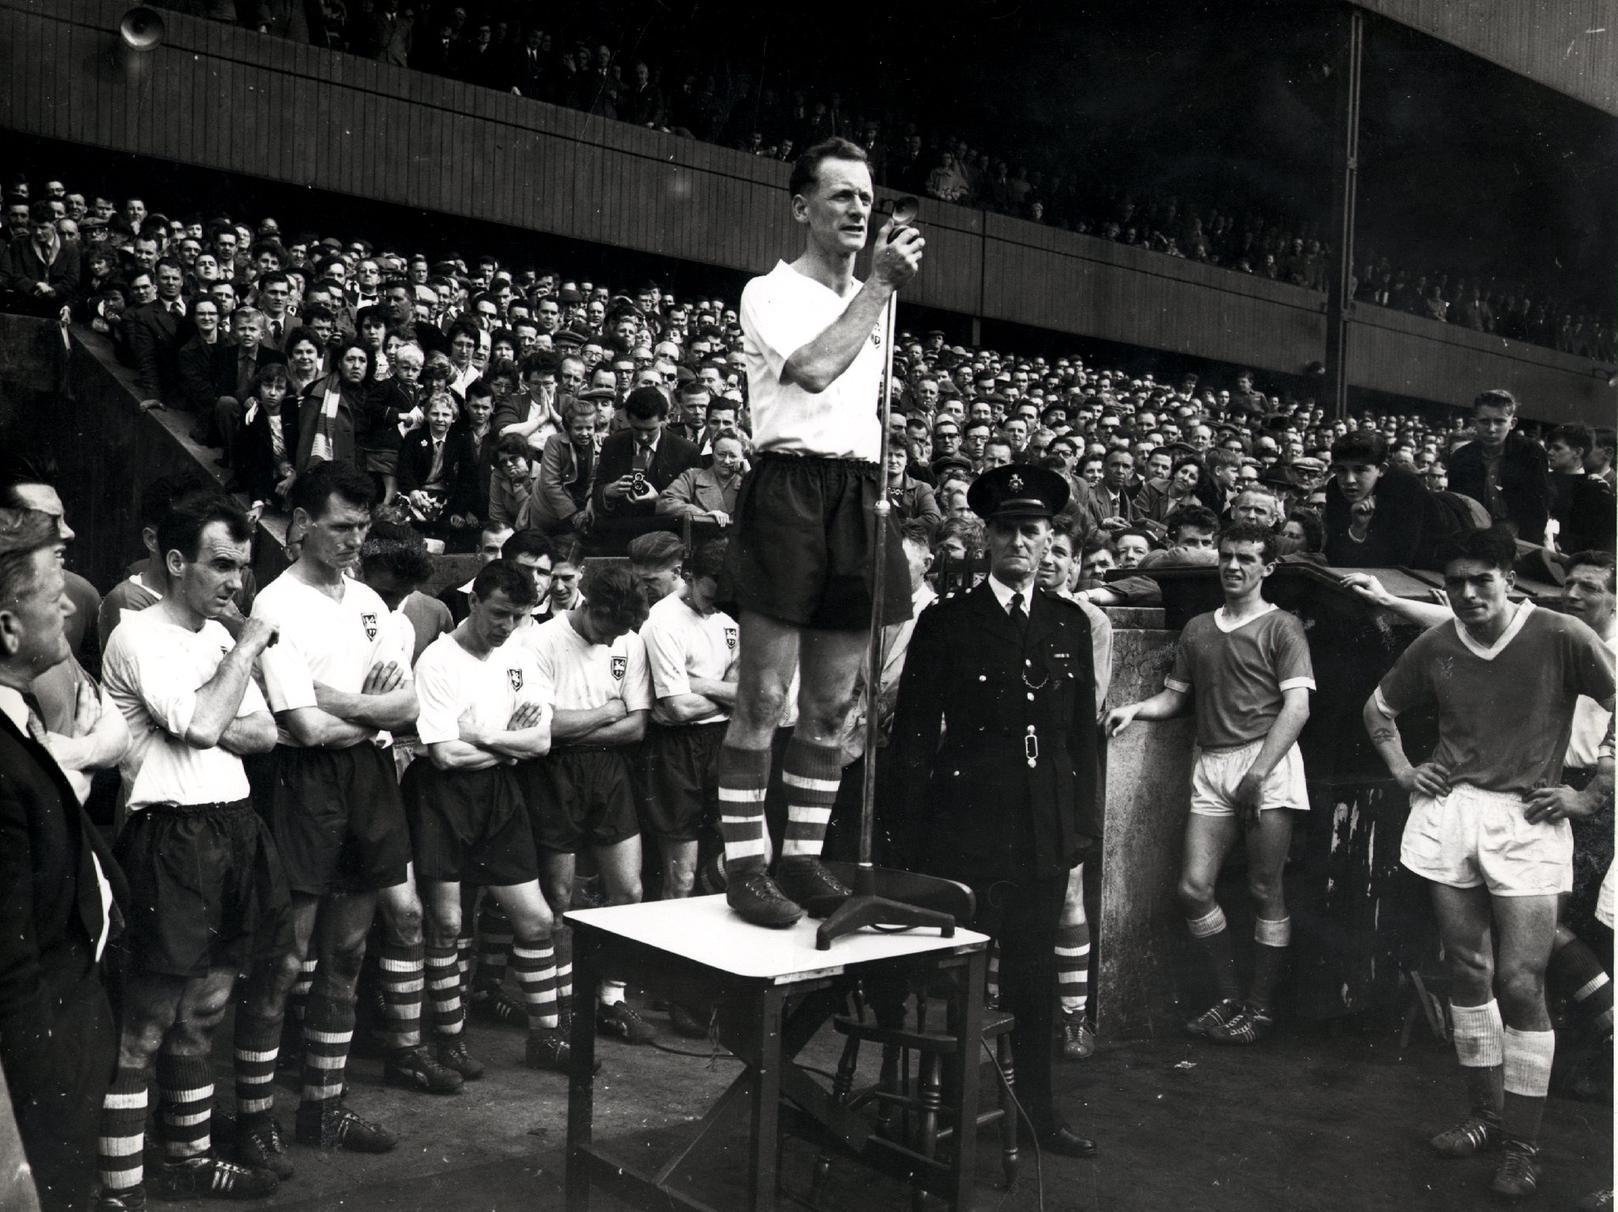 Tom Finney gives a farewell speech after his final game for Preston North End